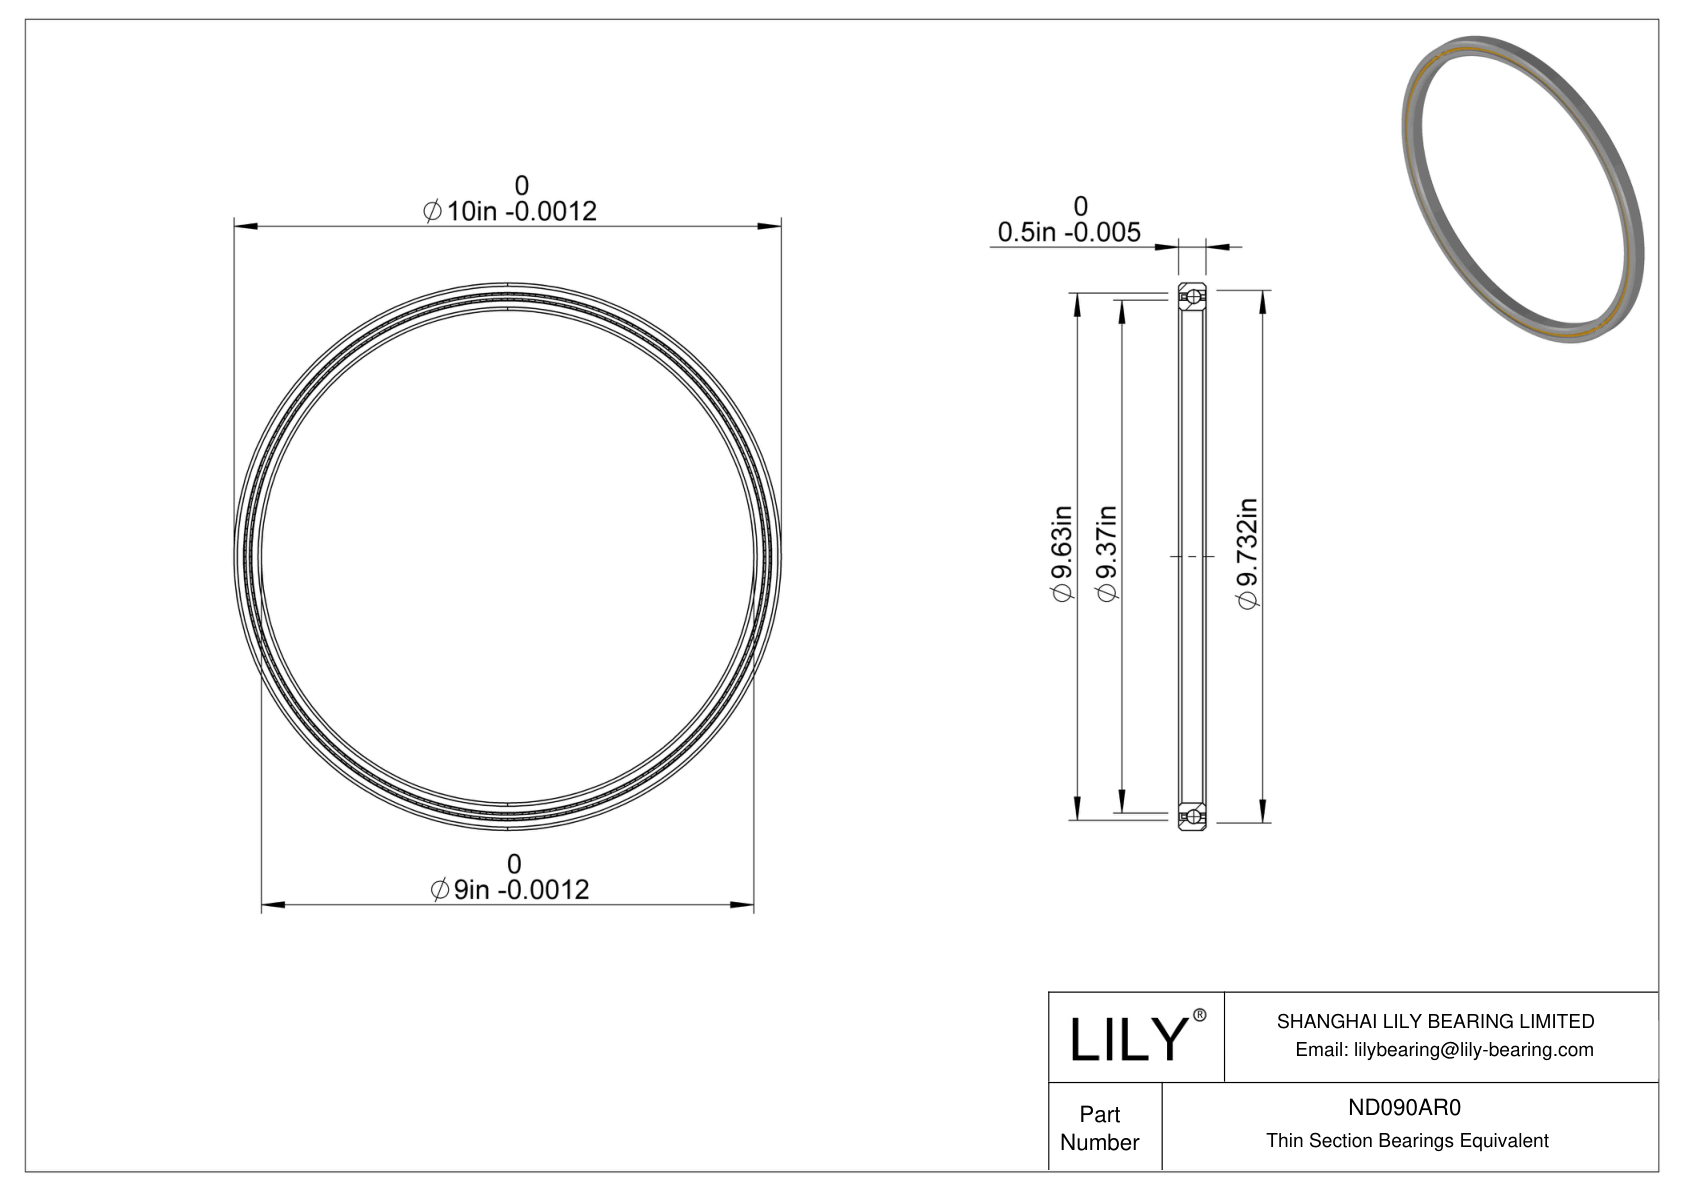 ND090AR0 Constant Section (CS) Bearings cad drawing